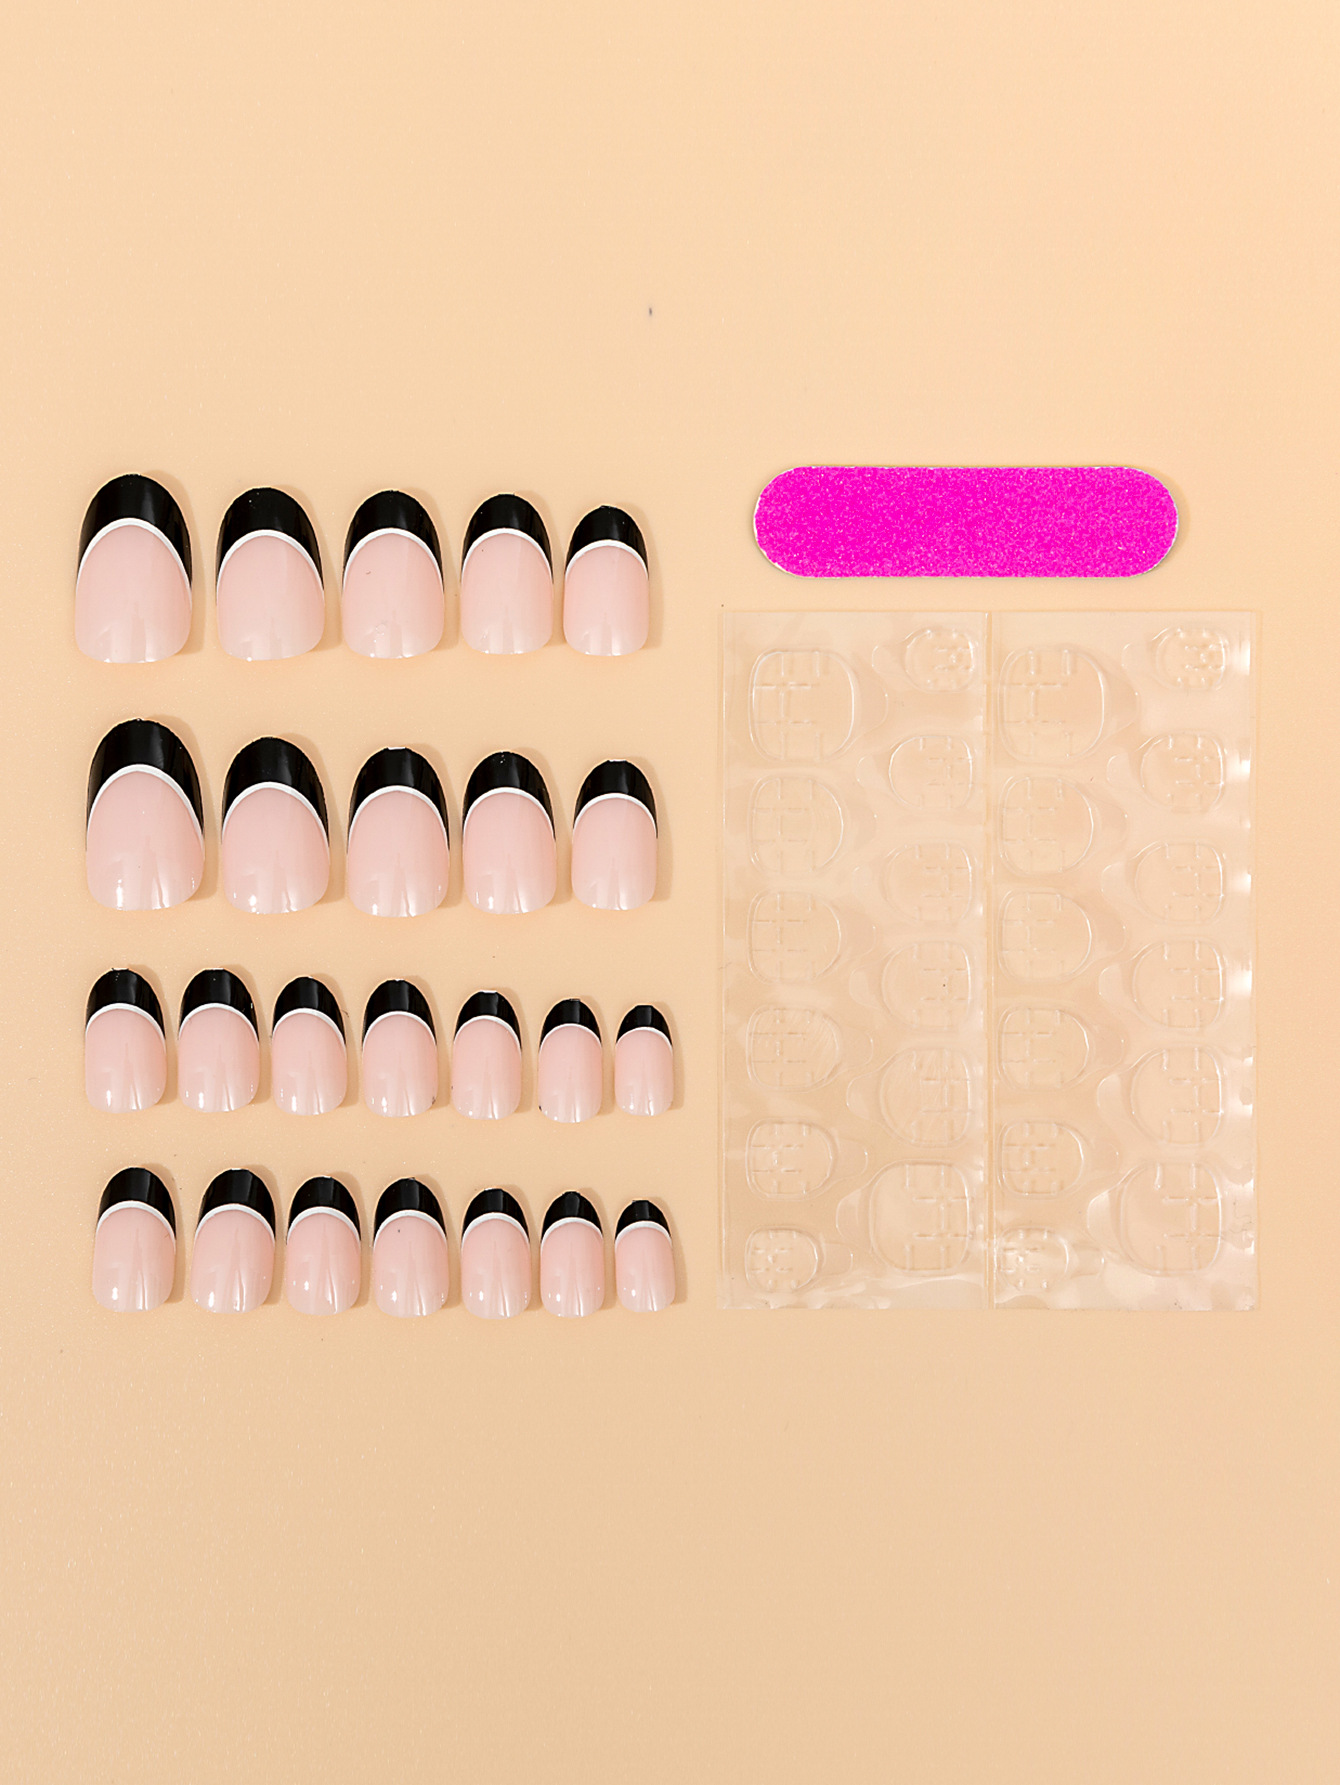 2023 New Nail Beauty Patch French Fake Nails 24 Pieces Finished Product Show Hand Length Wearable Wear Fake Nail Tip